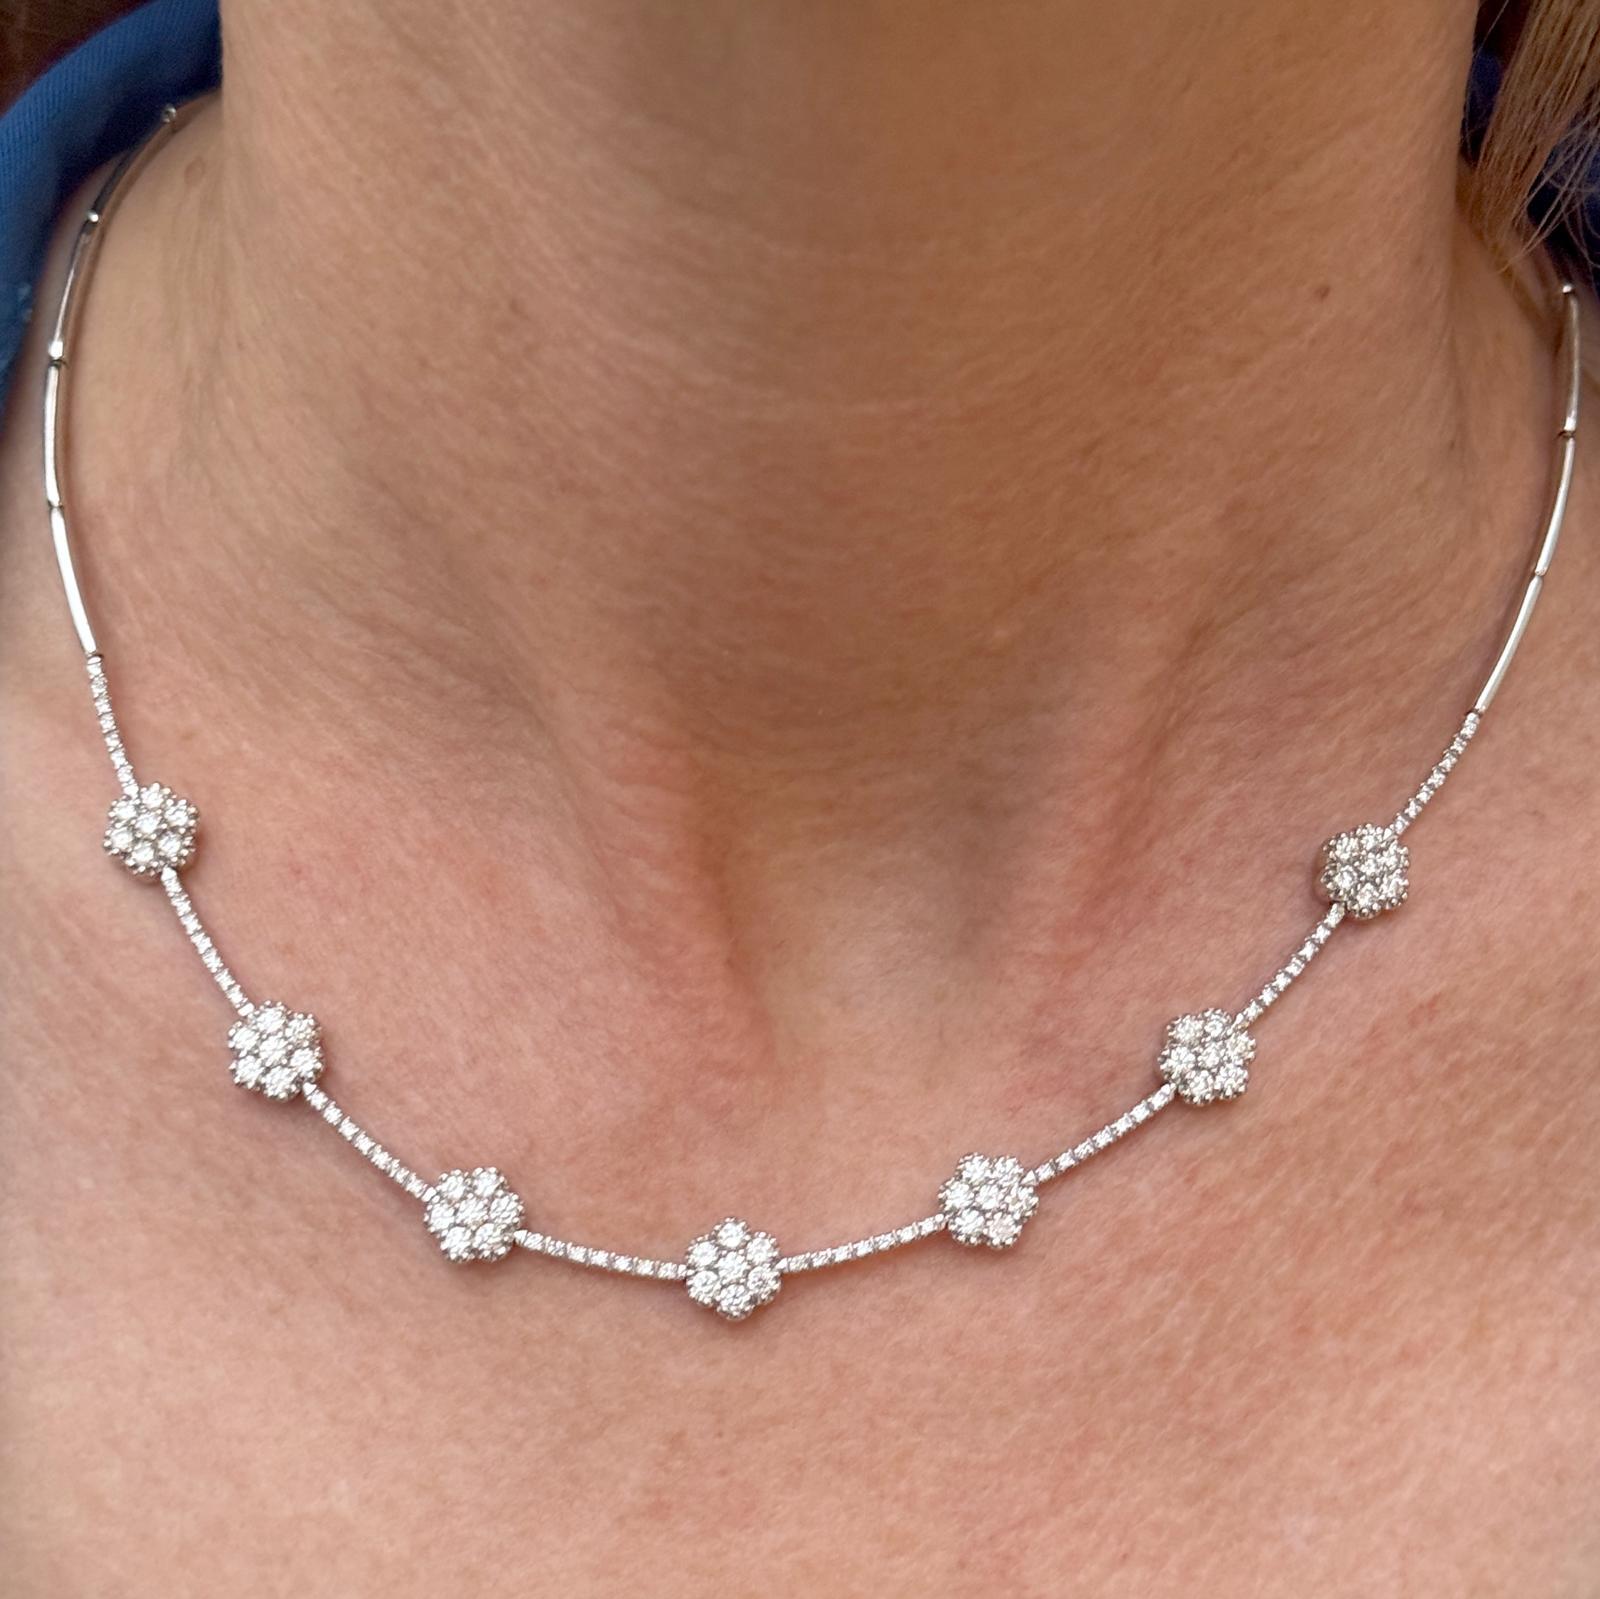 Modern and feminine diamond cluster necklace crafted in 18 karat white gold. The necklace features round brilliant cut diamonds weighing approximately 3.00 carat total weight. The diamonds are graded G-H color and VS2-SI1 clarity. The necklace